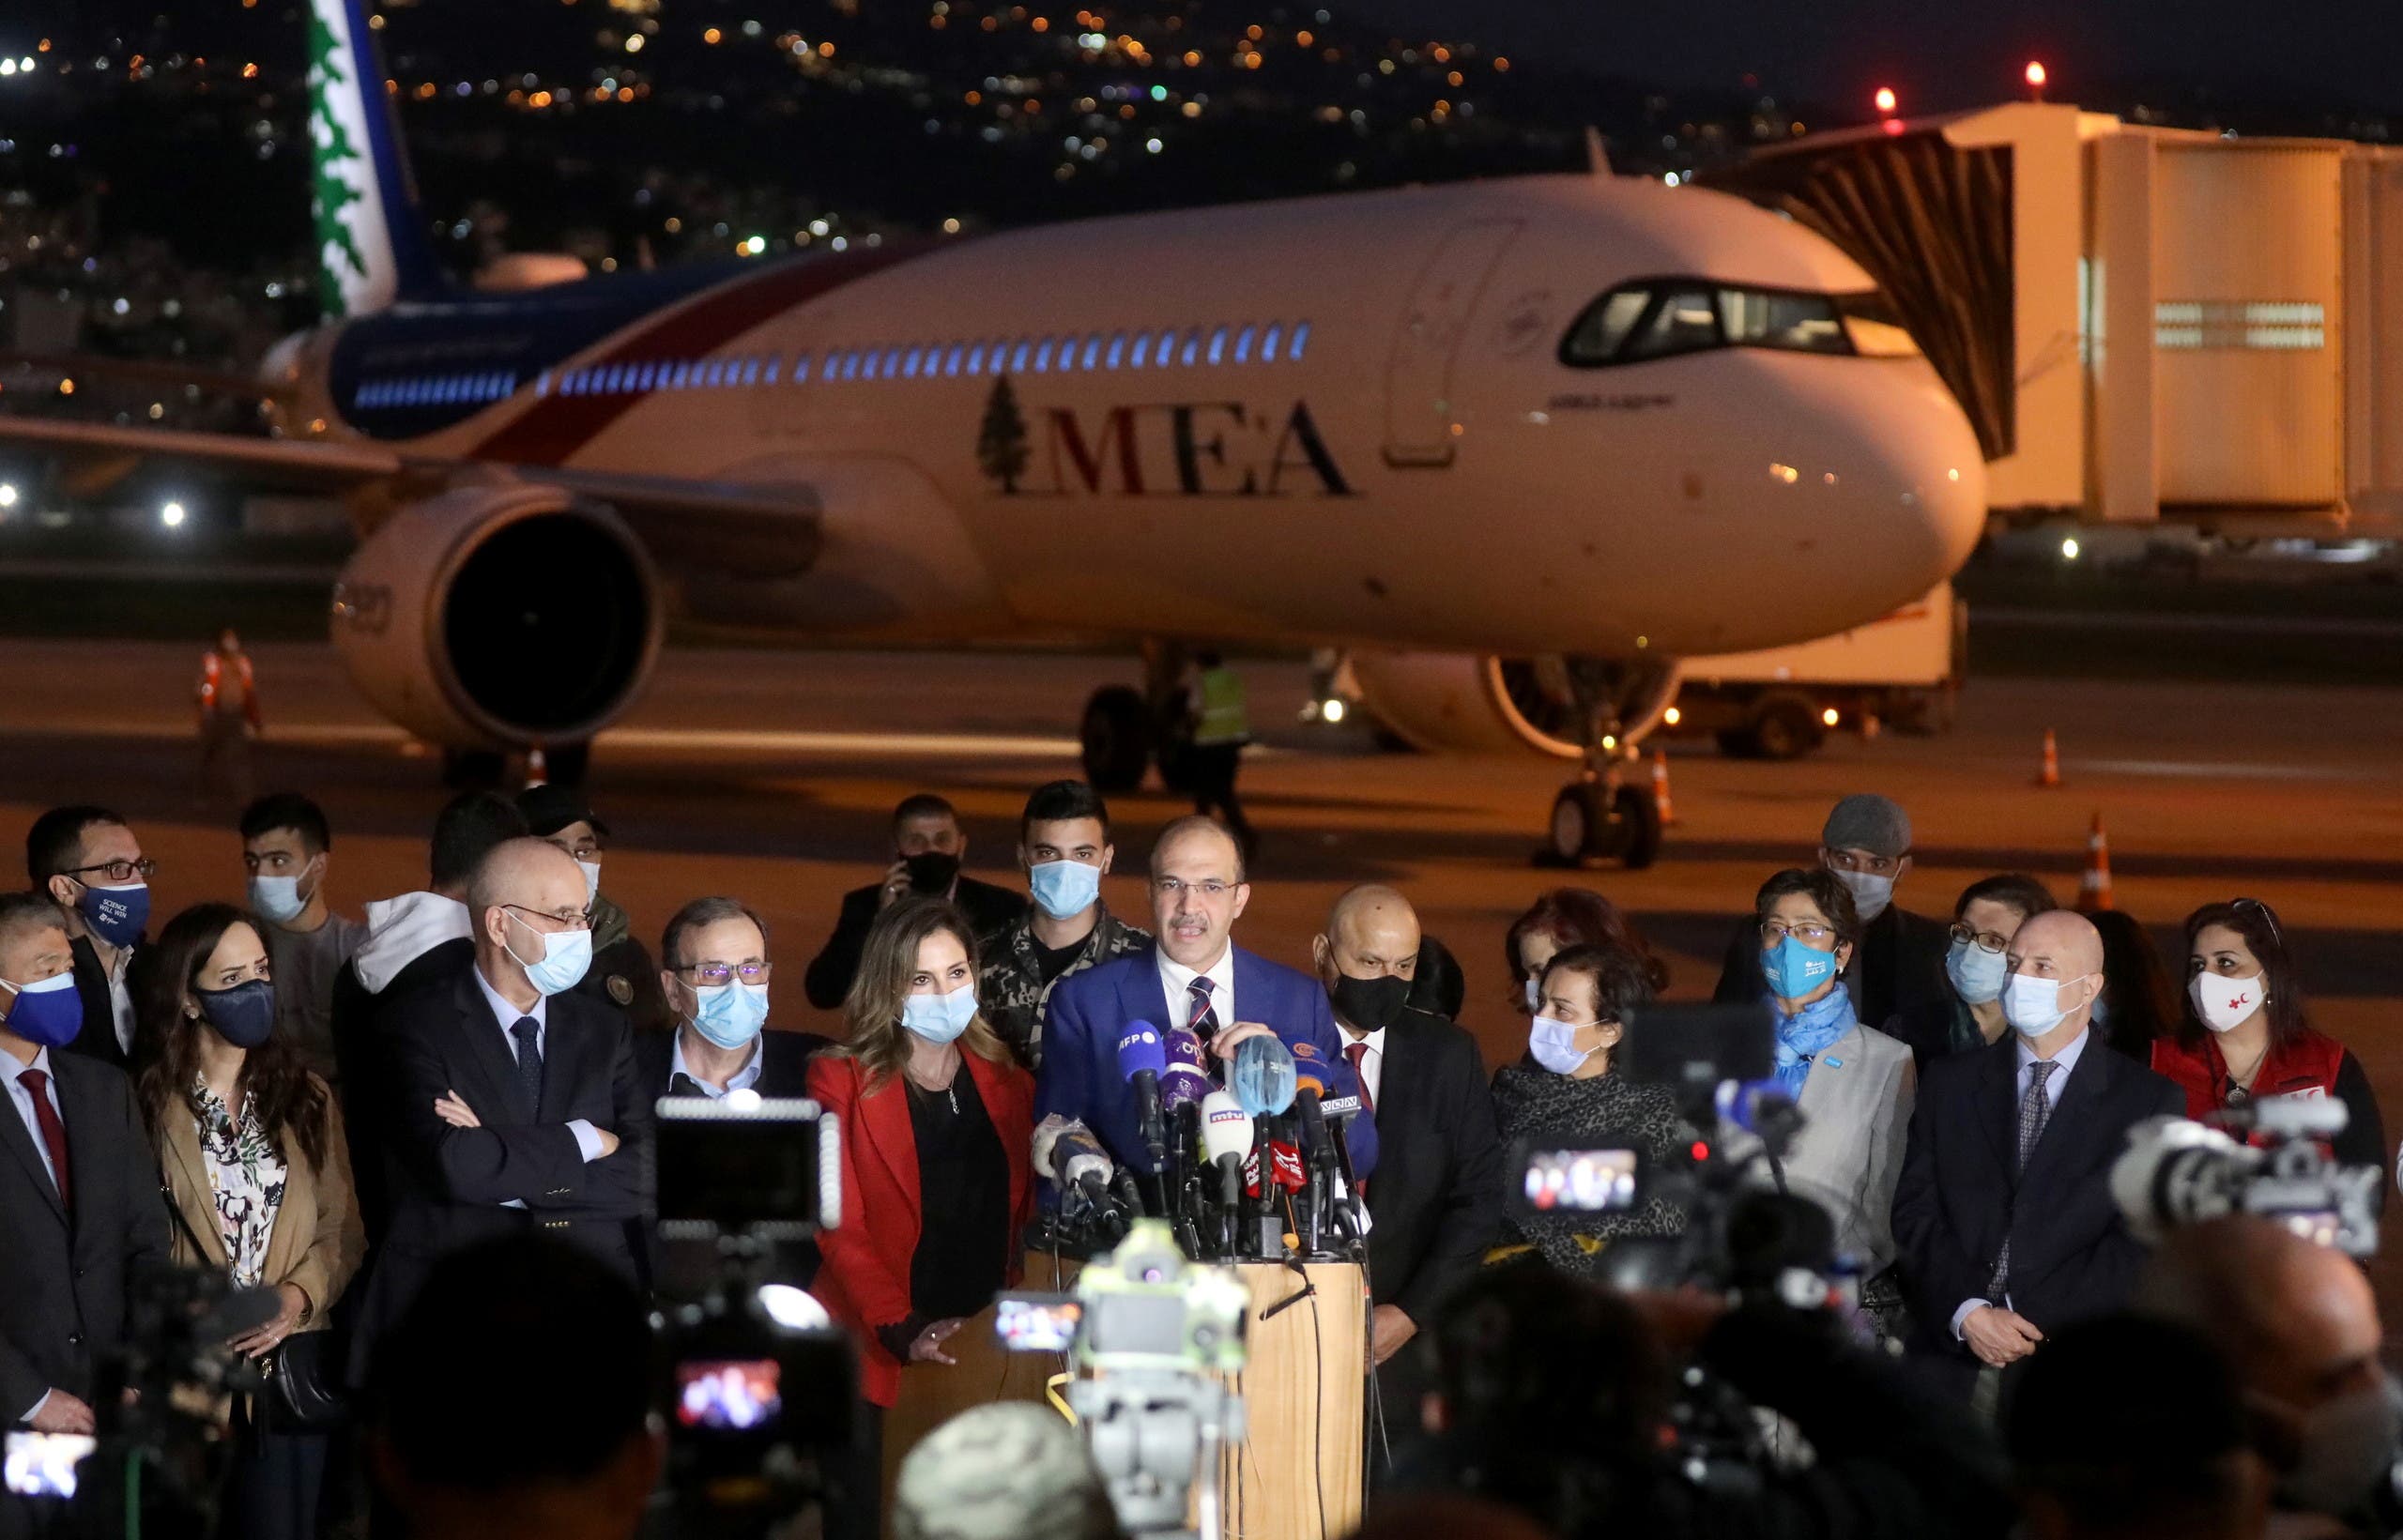 Lebanon's caretaker health minister Hamad Hasan talks near the aircraft carrying the first batch of doses of the Pfizer/BioNTech vaccine against the coronavirus disease (COVID-19) at Beirut International Airport, Lebanon February 13, 2021. (Reuters)